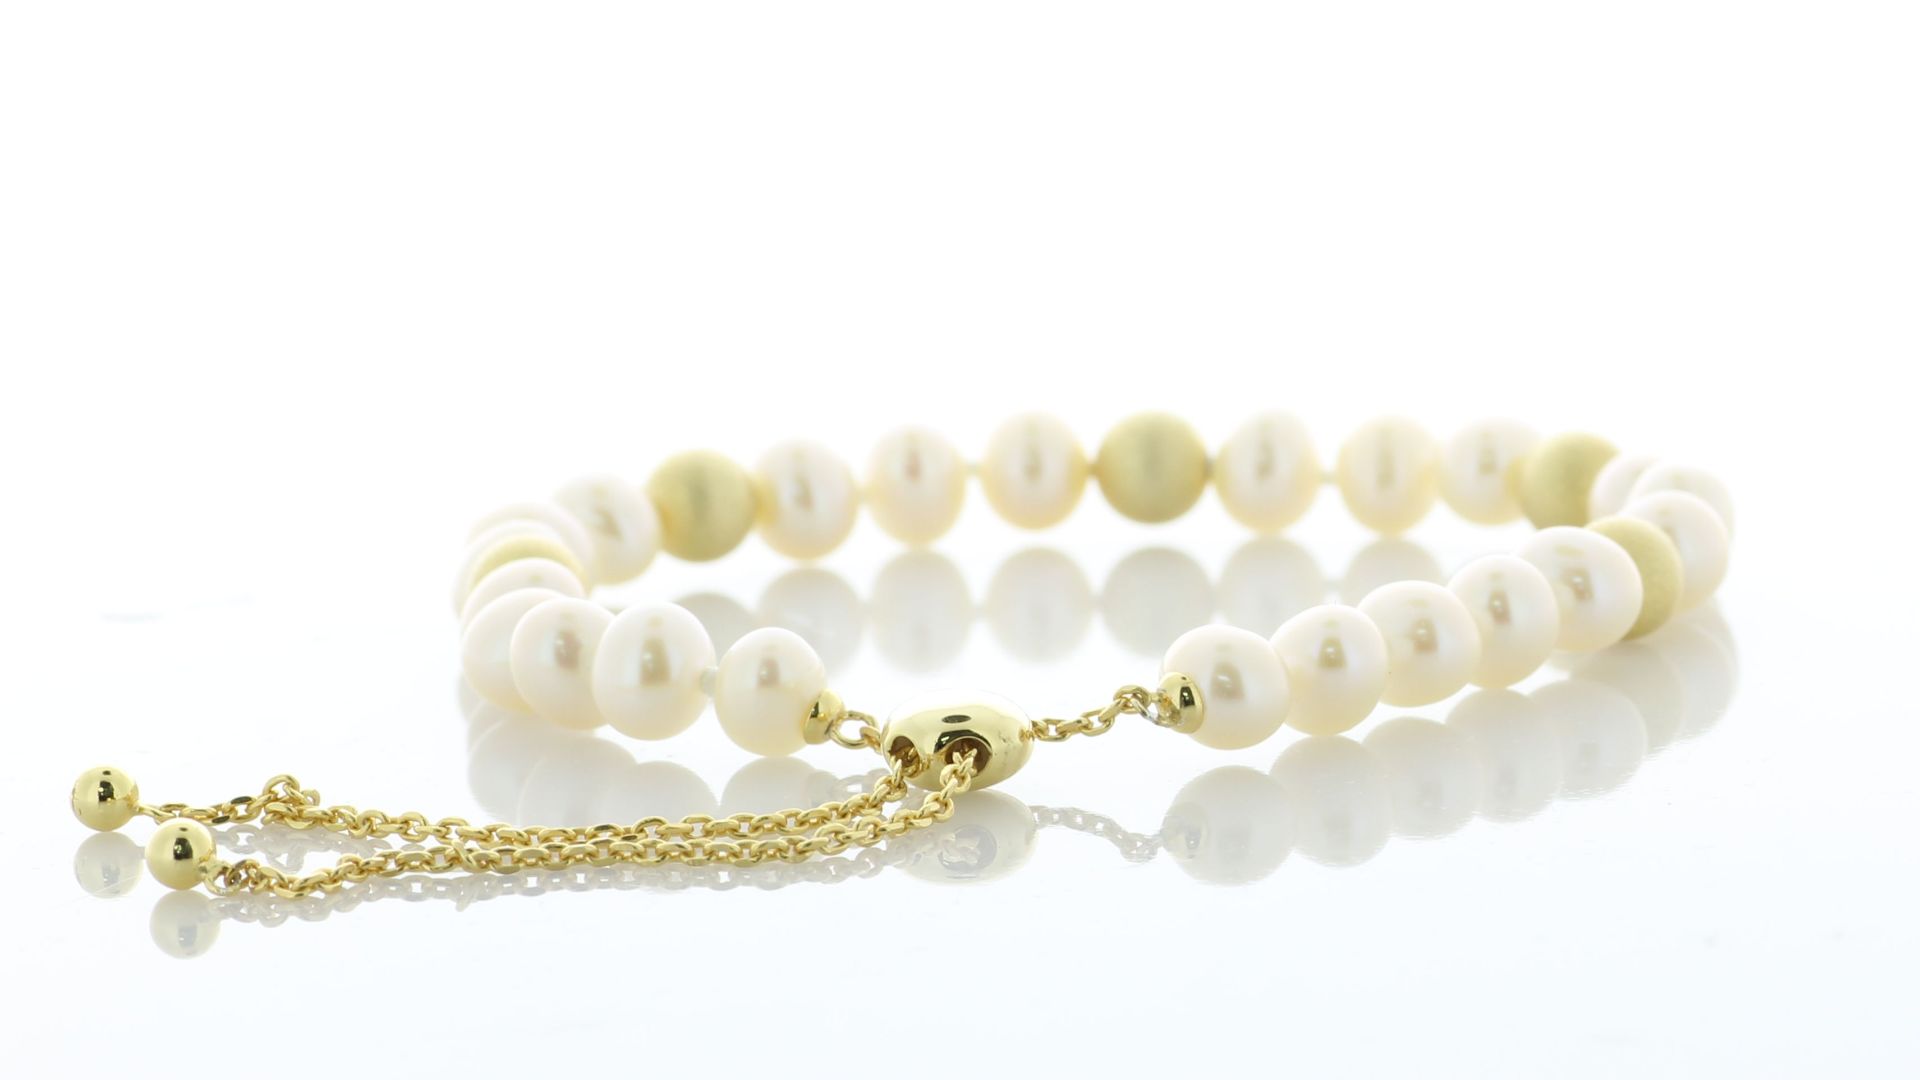 Freshwater Cultured 5.5 - 6.0mm Pearl Bracelet With Gold Plated Silver Clasp And Fastening - - Image 2 of 4